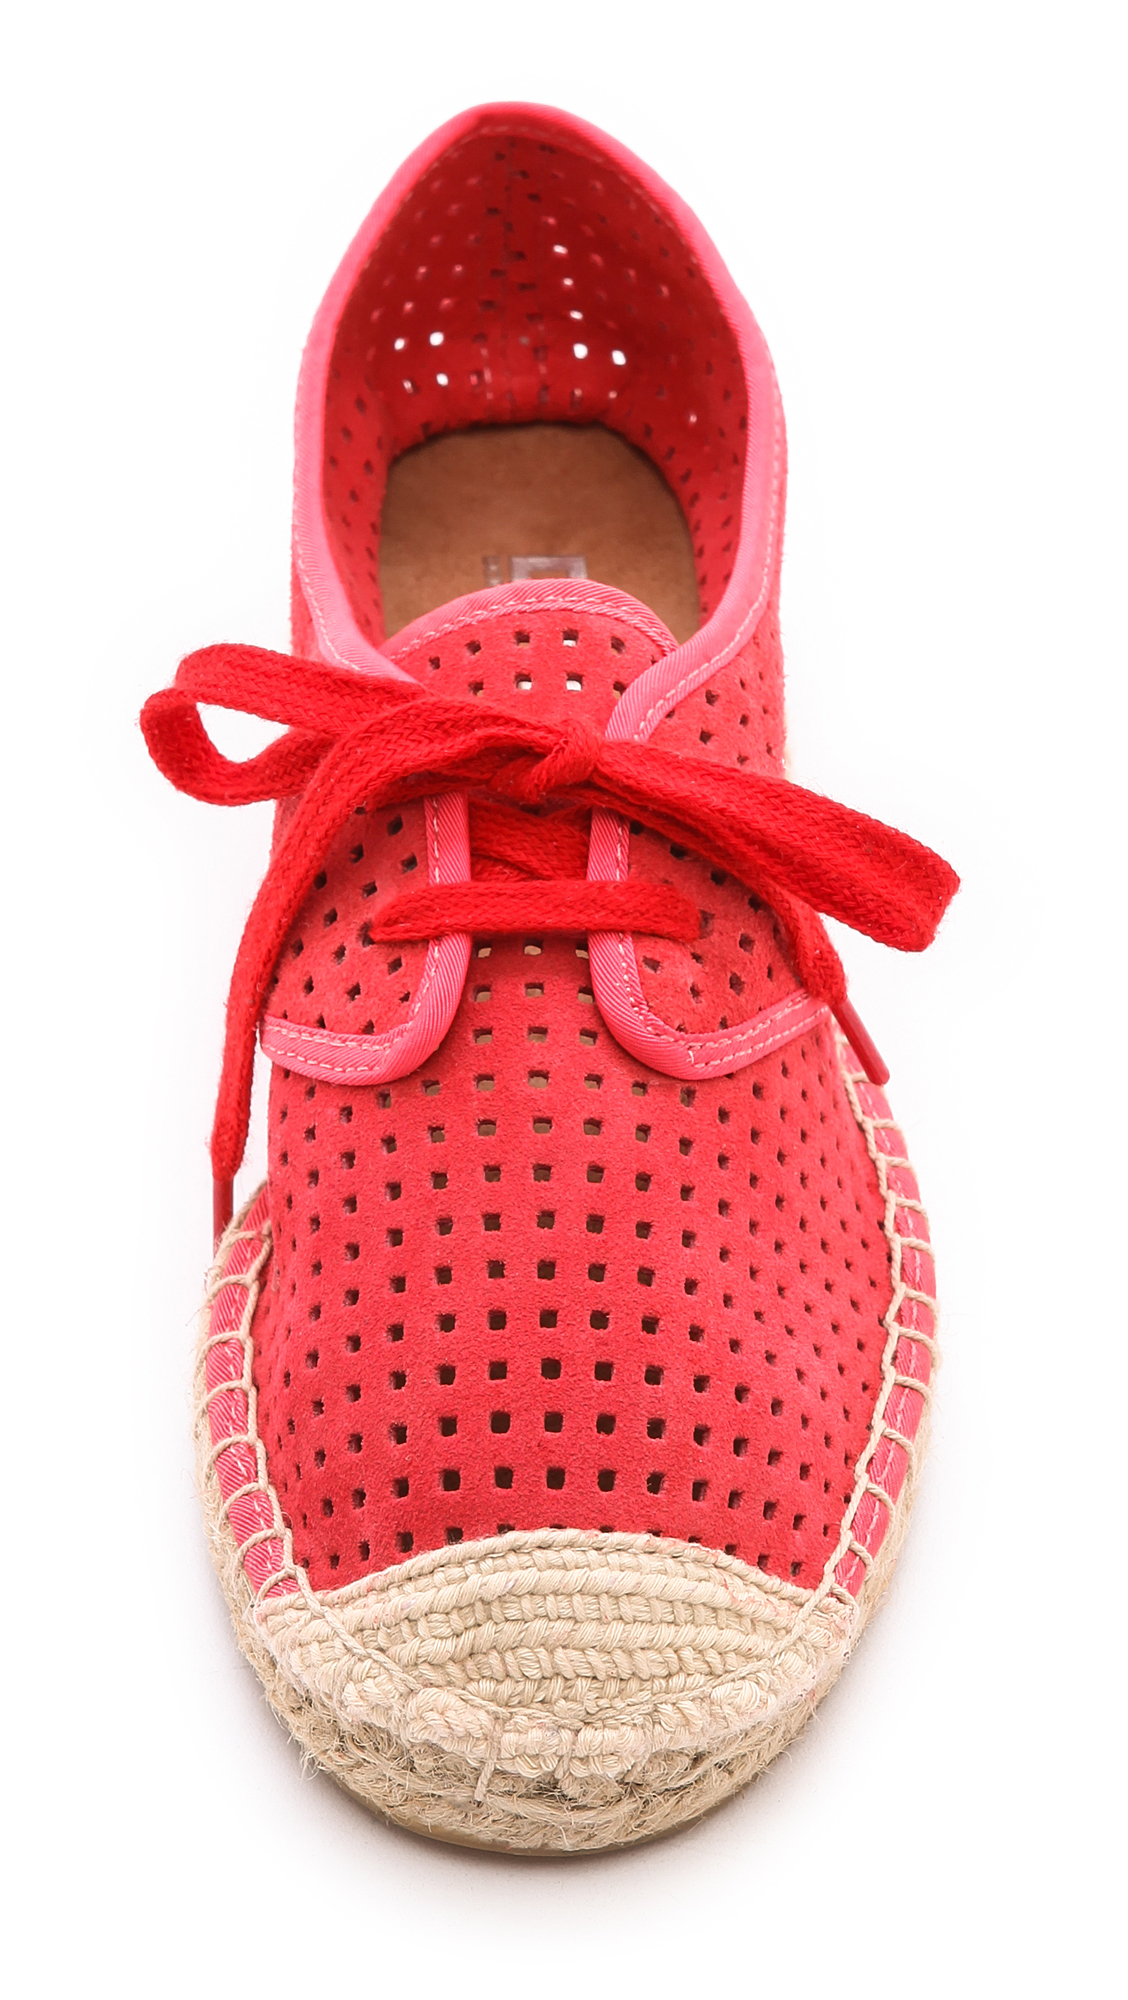 Lyst - Dkny Ivana Lace Up Espadrilles in Red